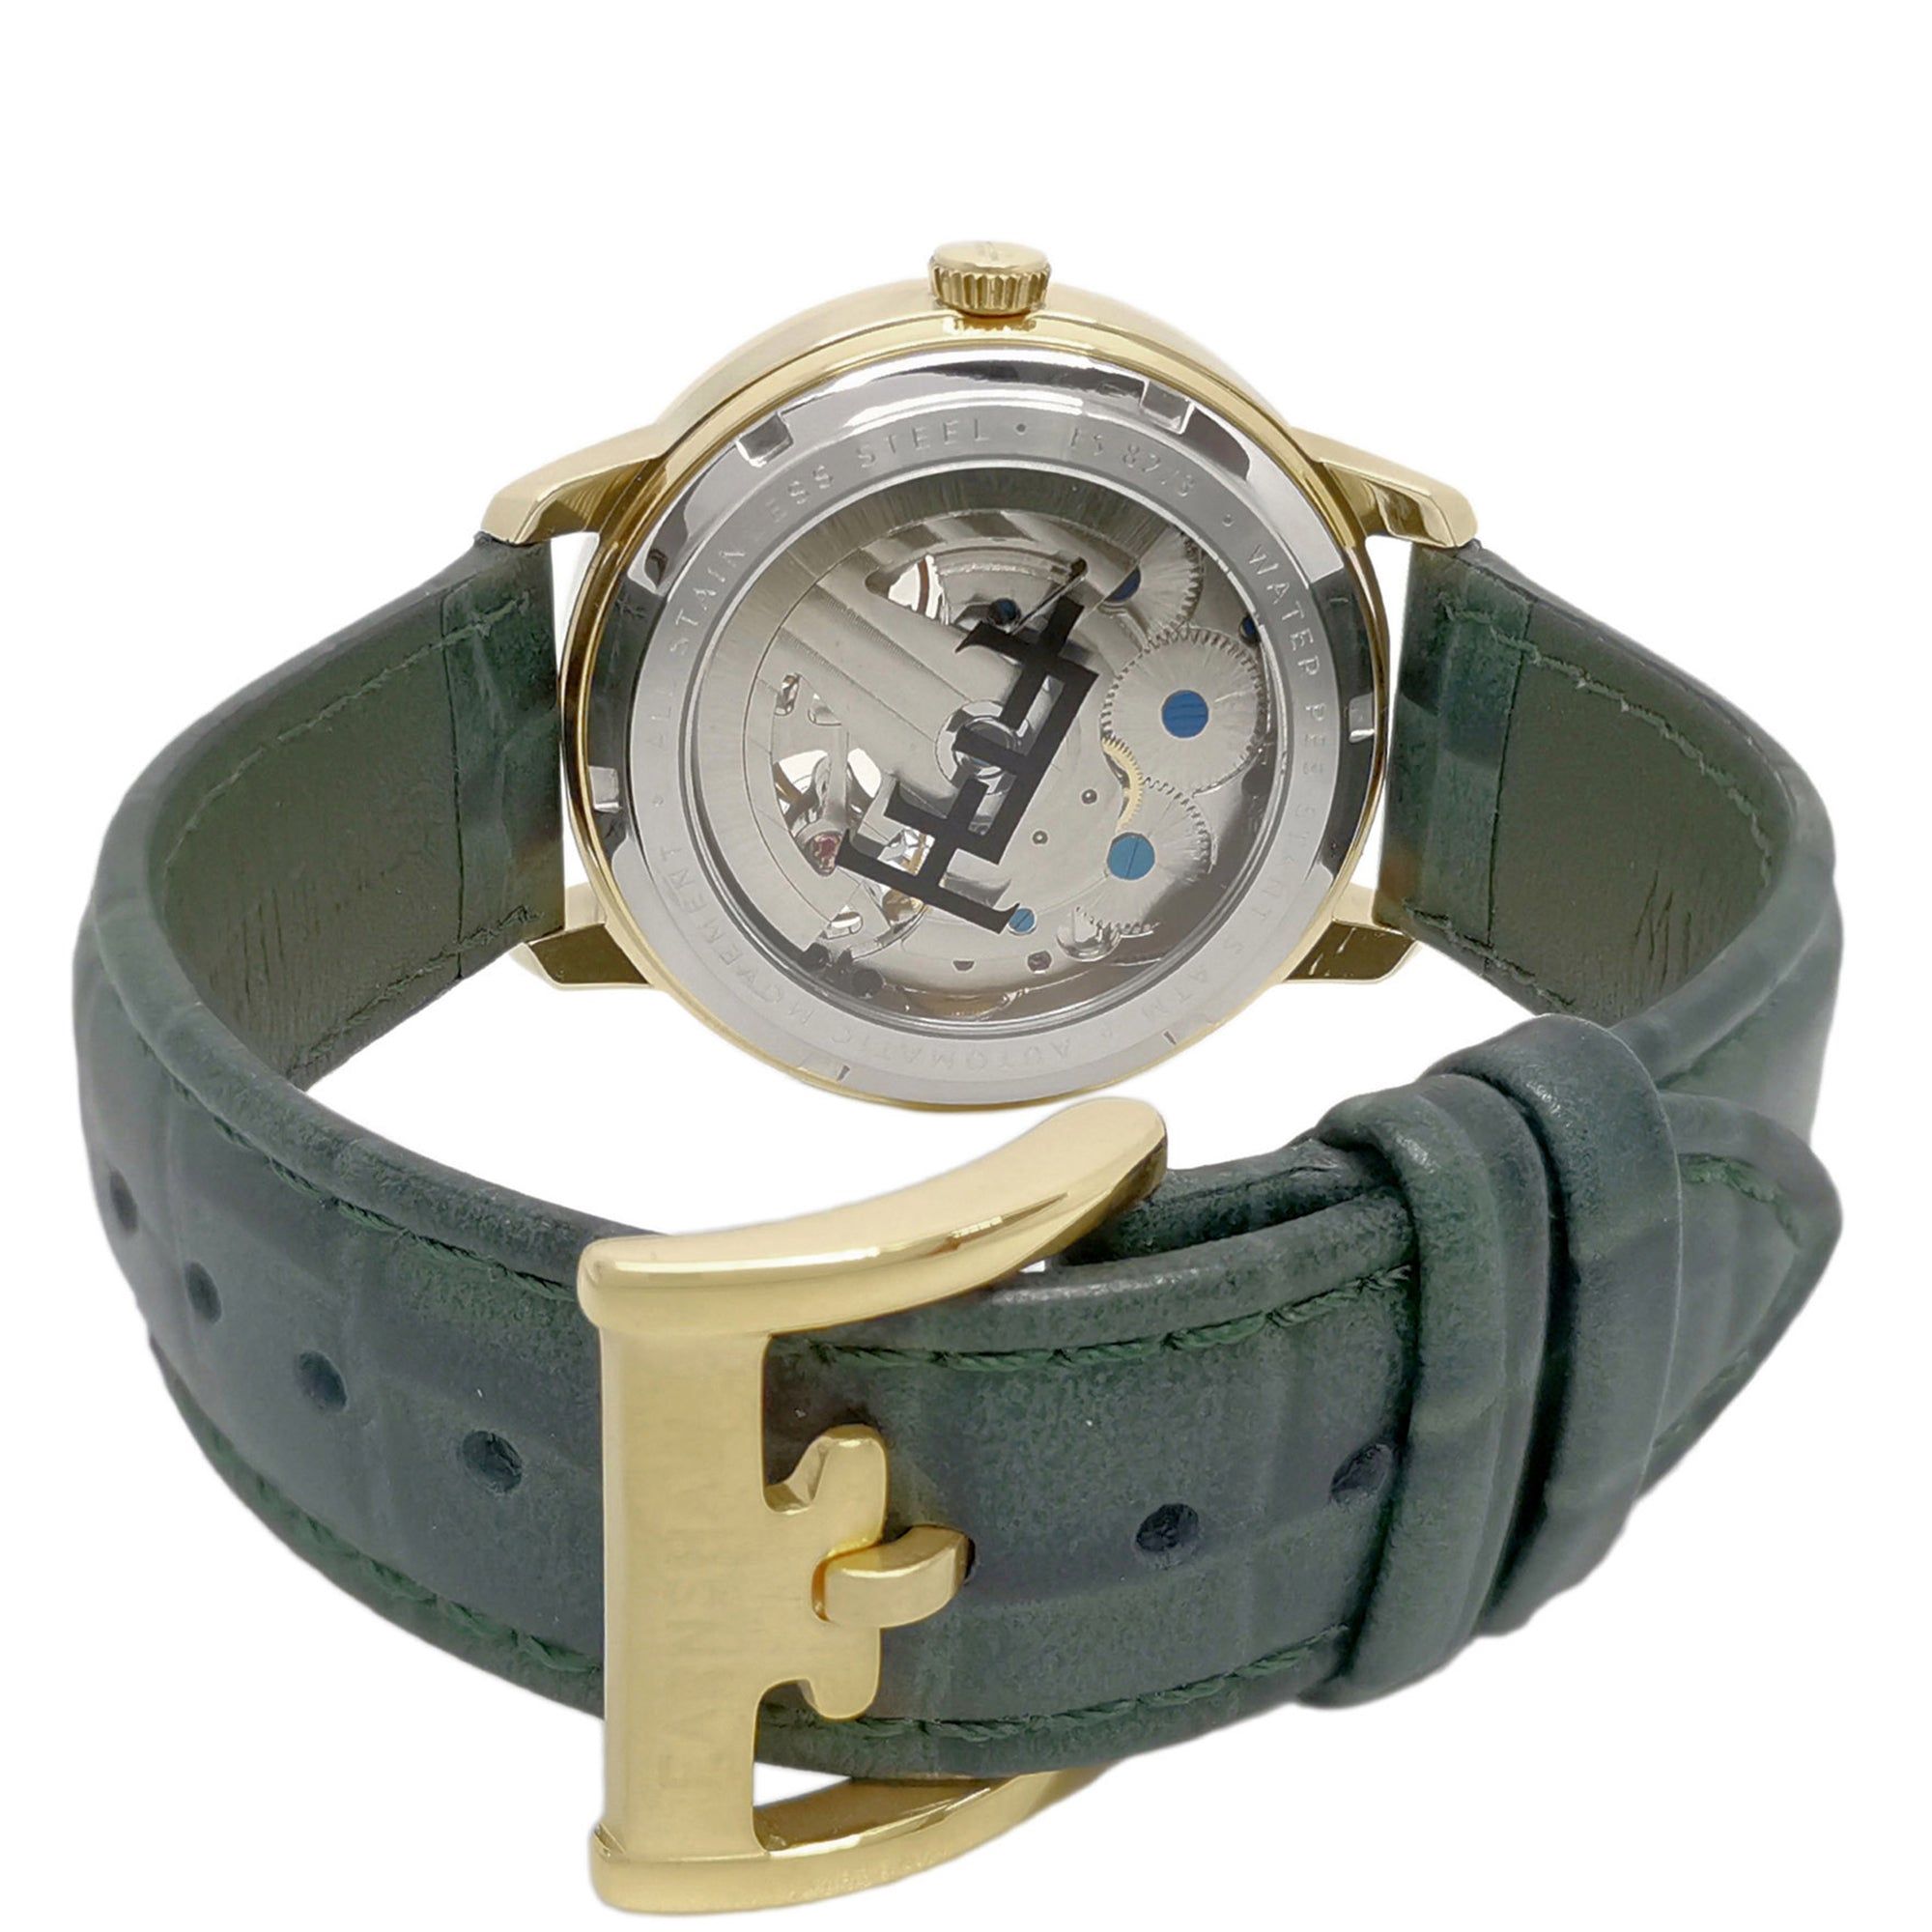 Collection: Brewster Double Barrel Automatic
Model: Es-8273-05
Movement: Automatic 
Case Material: Stainless Steel
Case Diameter (mm): 42
Case Thickness (mm): 13
Case Shape: Round
Case Color: Gold
Dial Color: Green
Band: Genuine Leather Strap
Band Color: Green
Buckle: Strap Buckle
Band Width (mm): 20
Water Resistance: 5 Atm
Watch Weight (g): 120
Warranty: 2 Years International Warranty